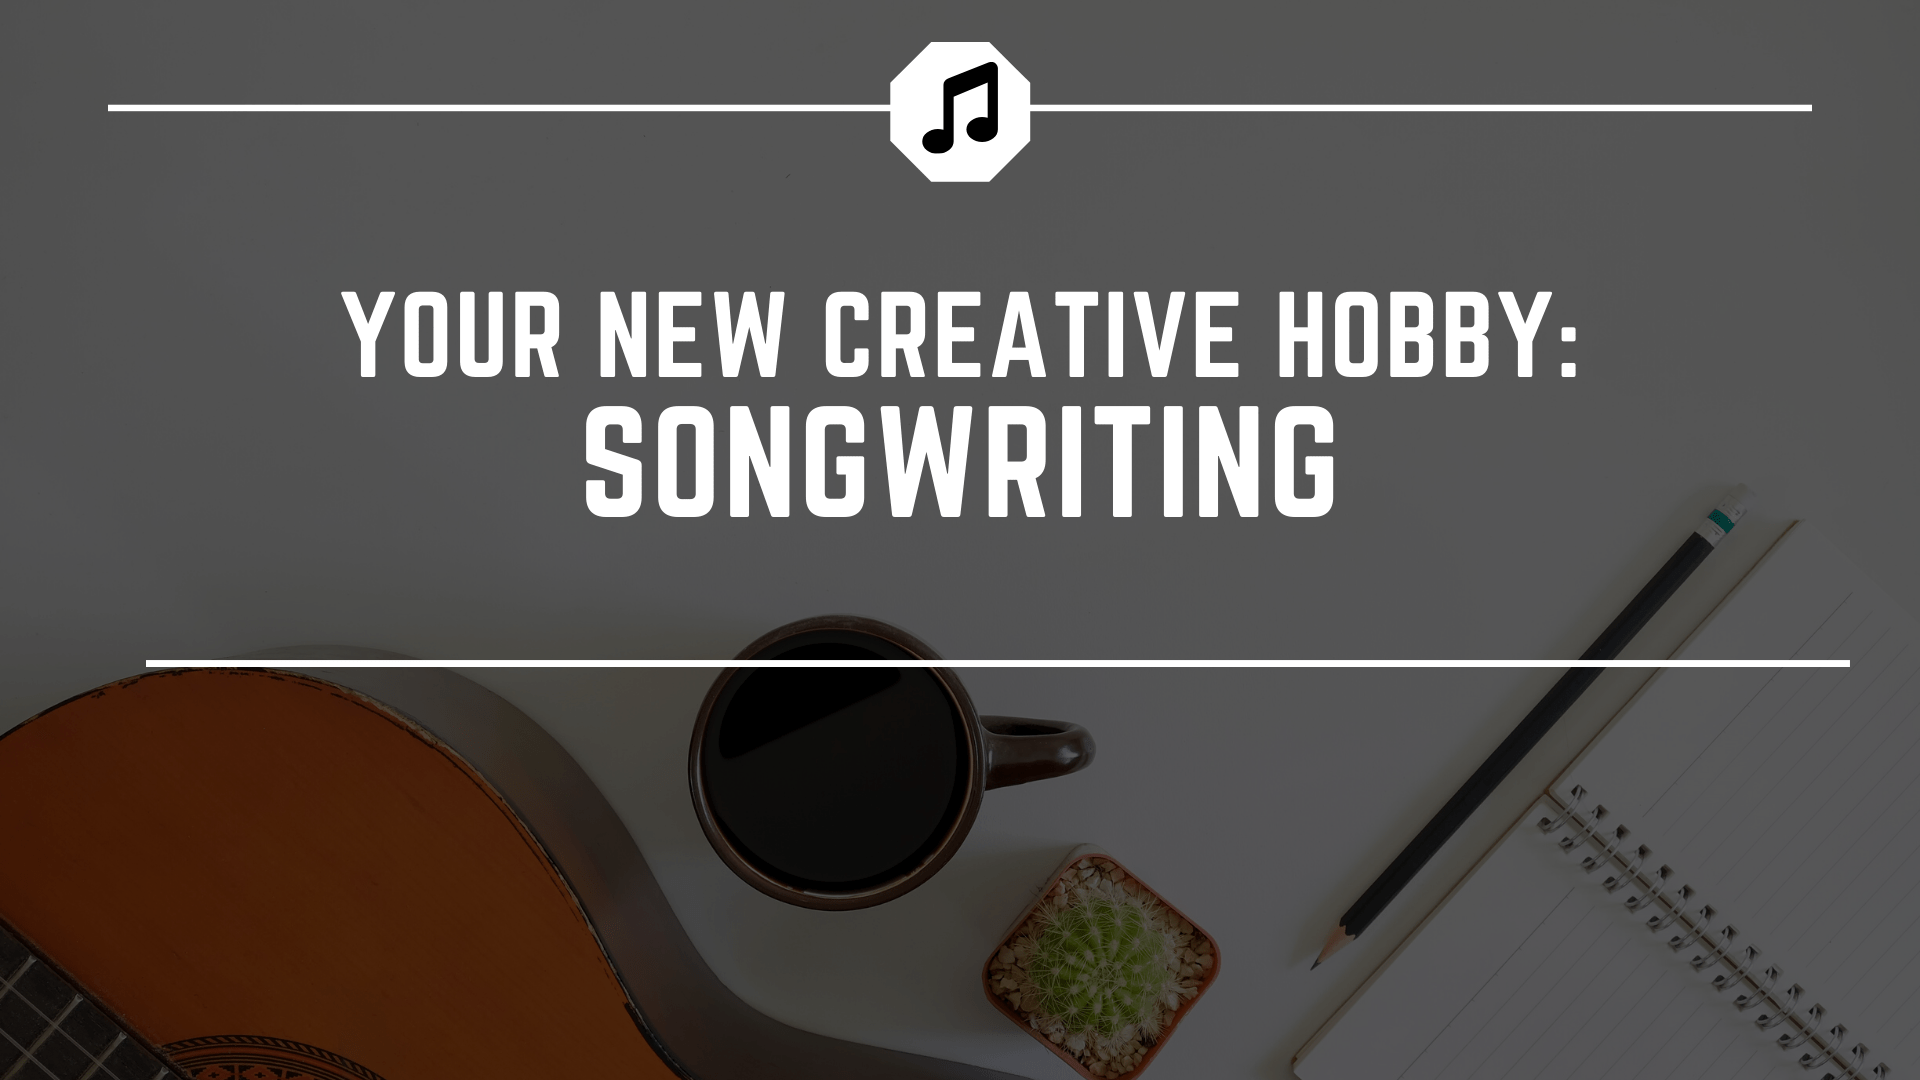 How To Start Writing Your Own Songs